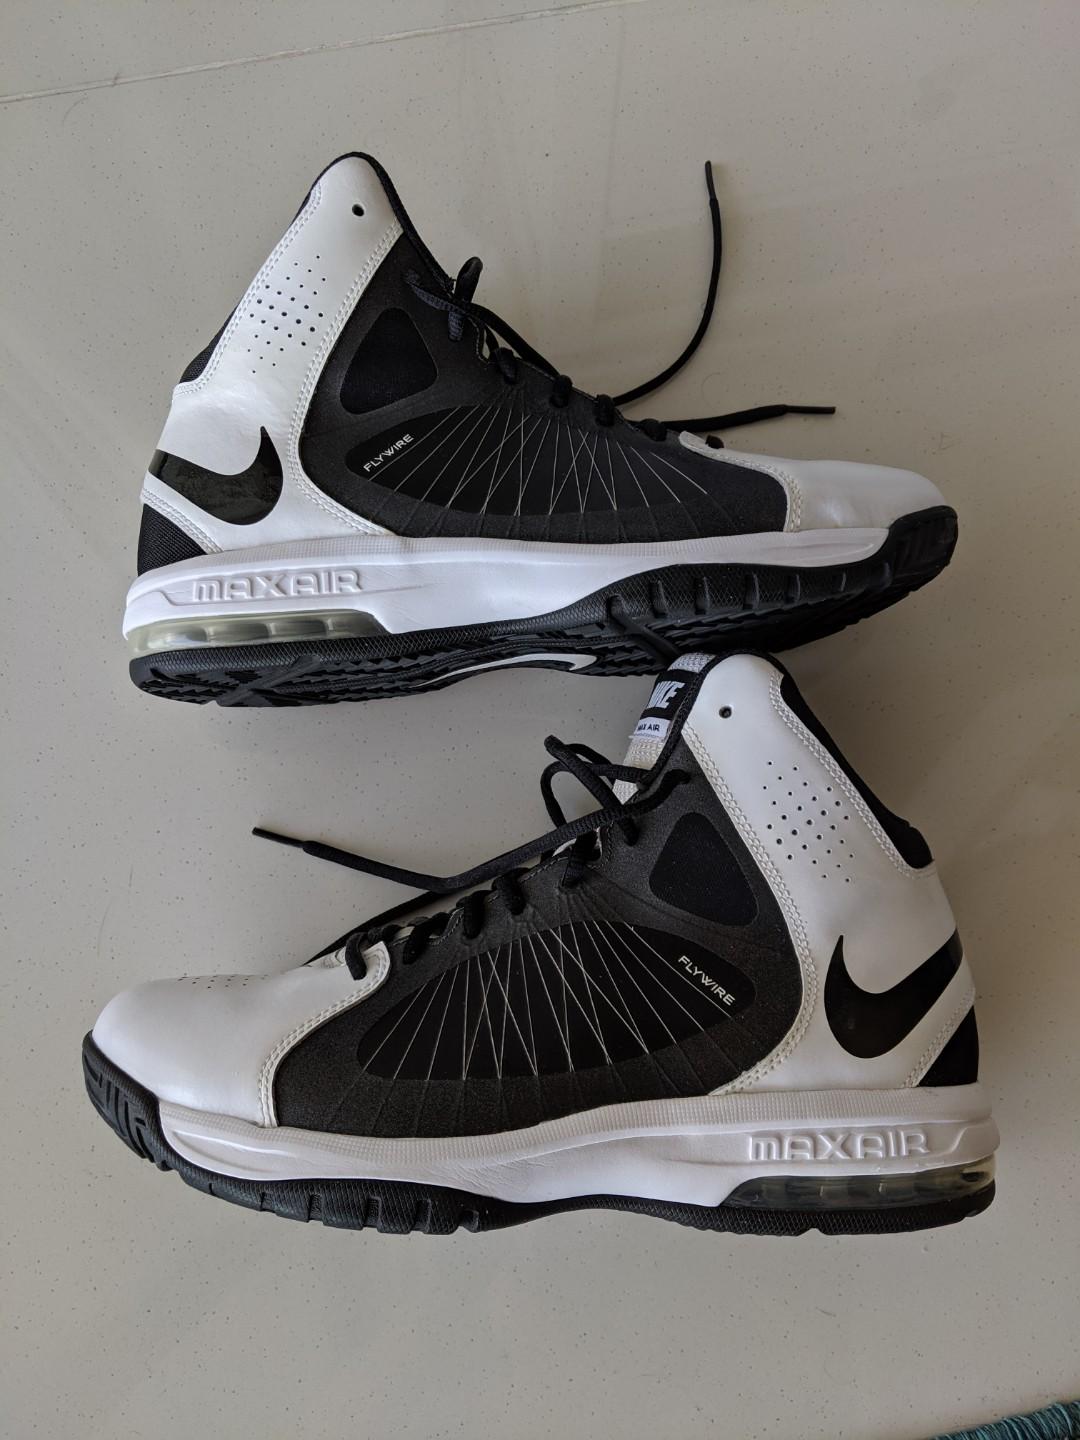 nike max air flywire basketball shoes